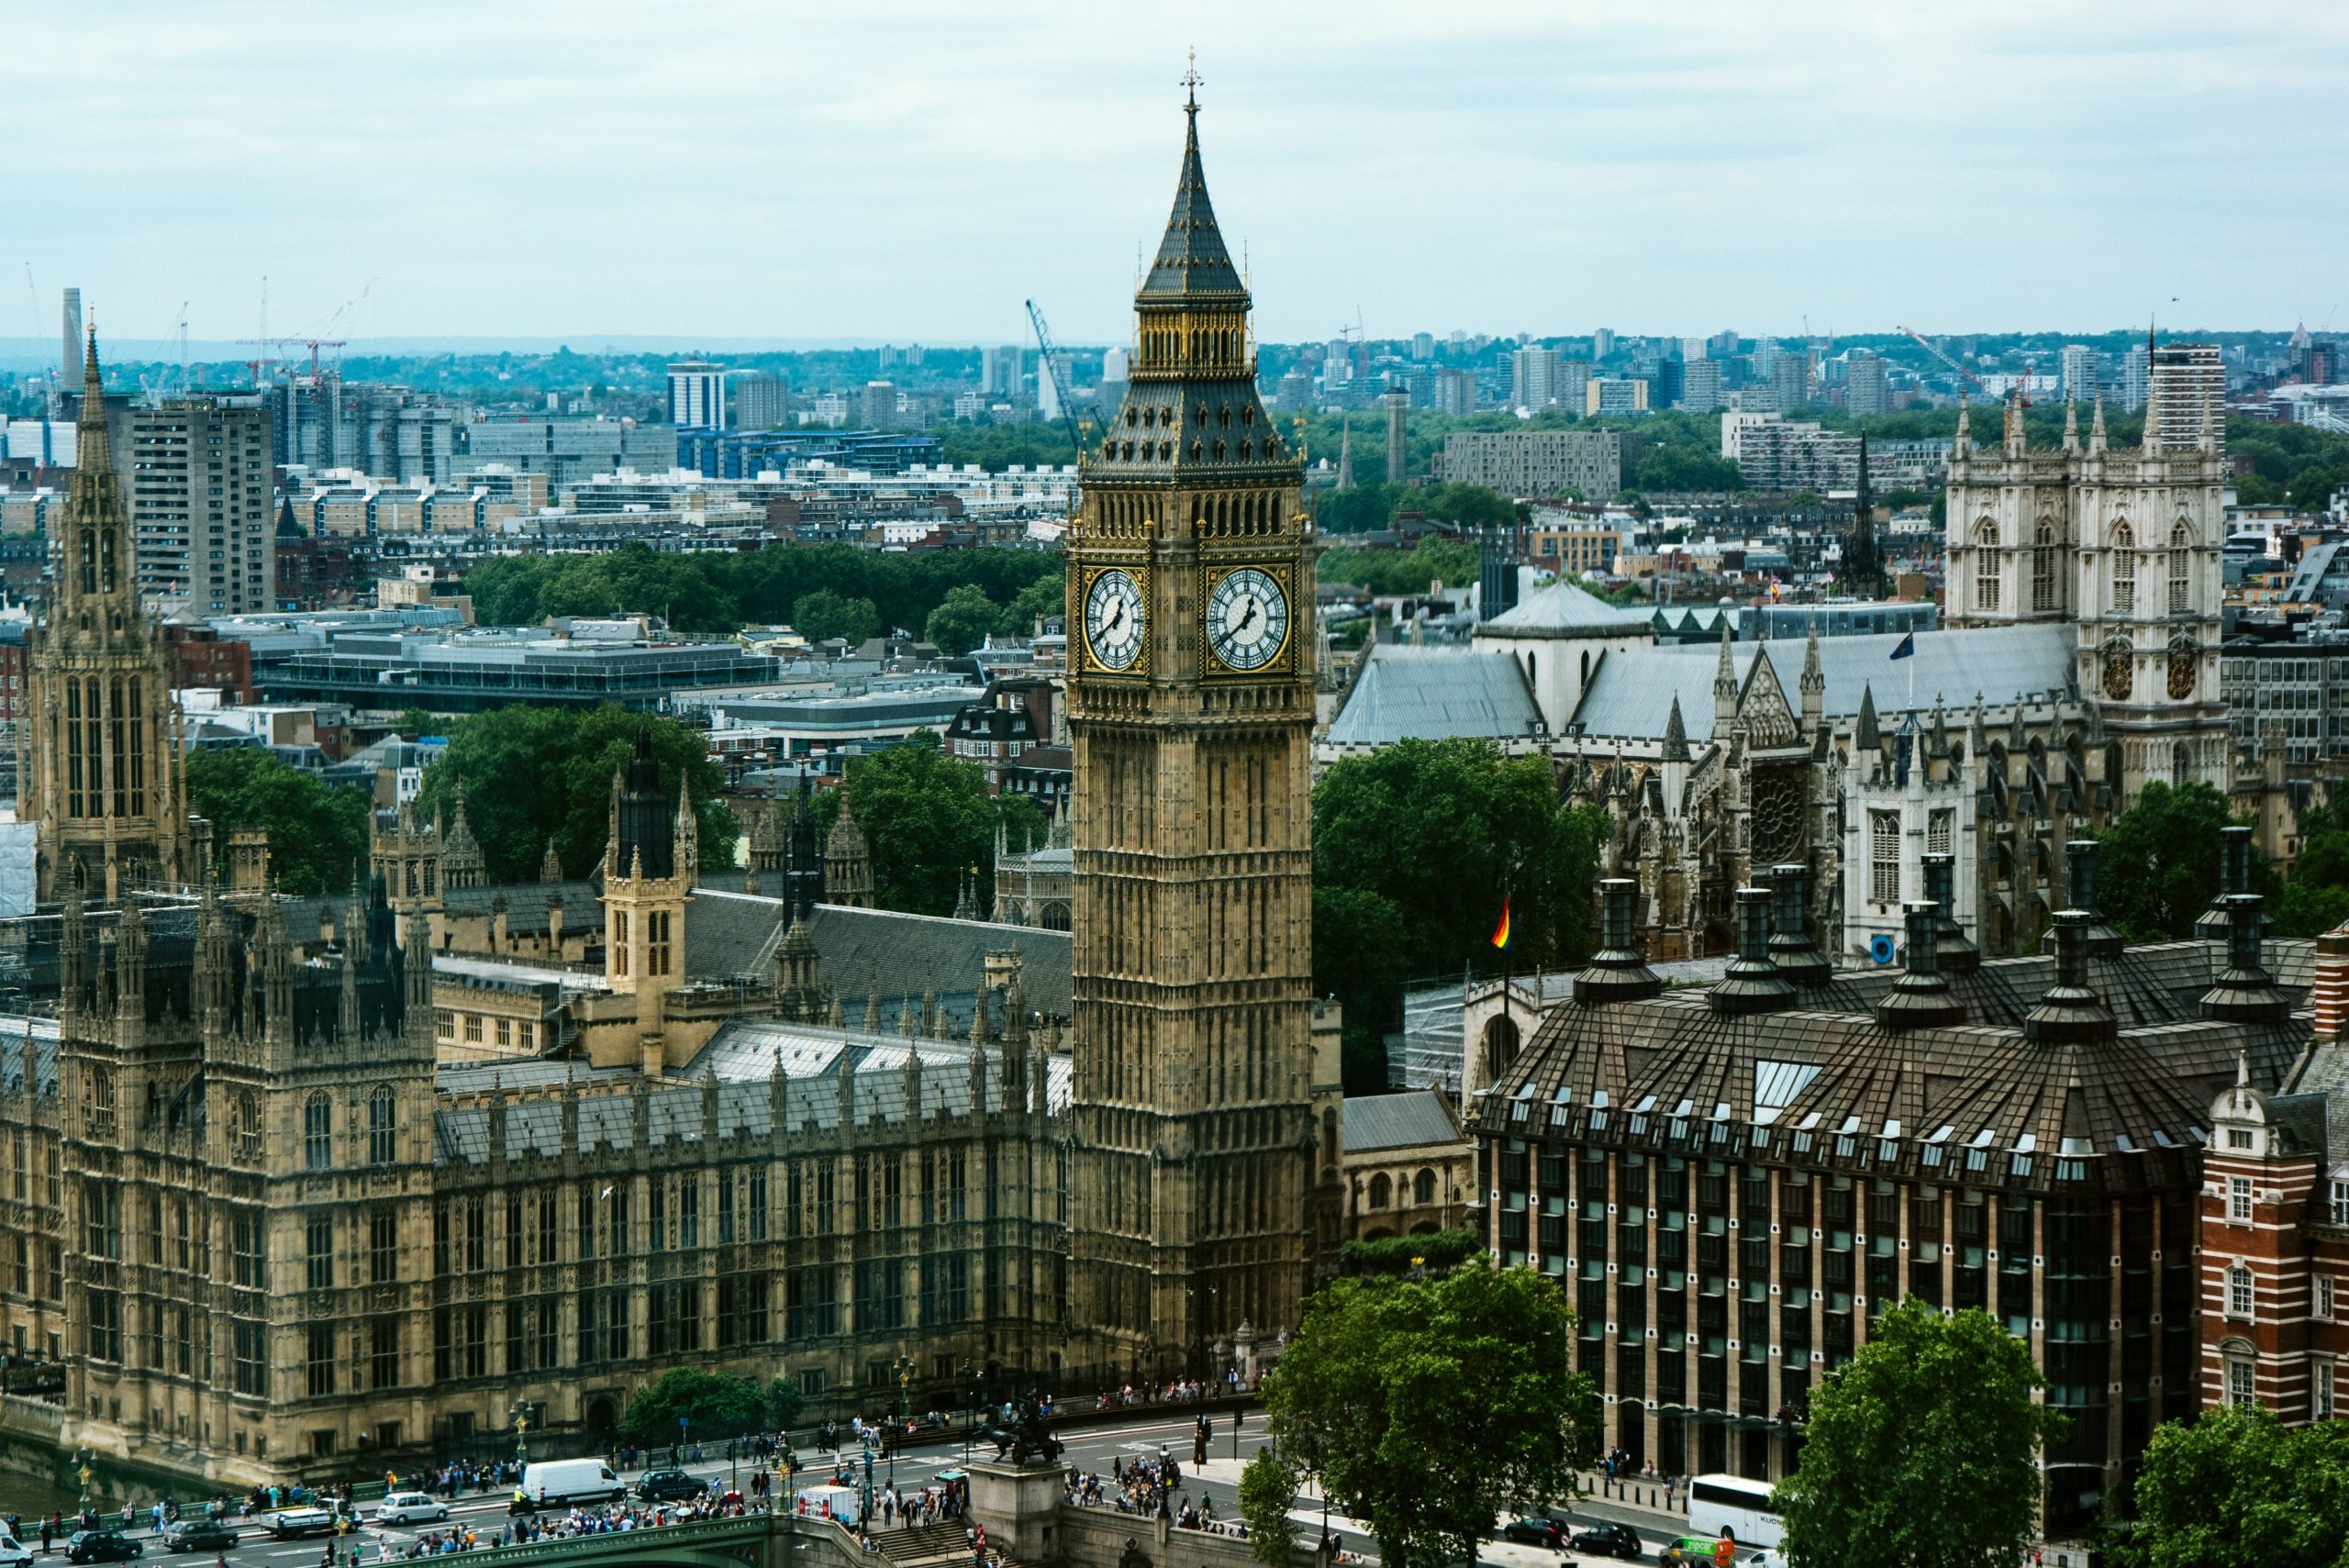 An aerial shot shows the house of commons and Big Ben